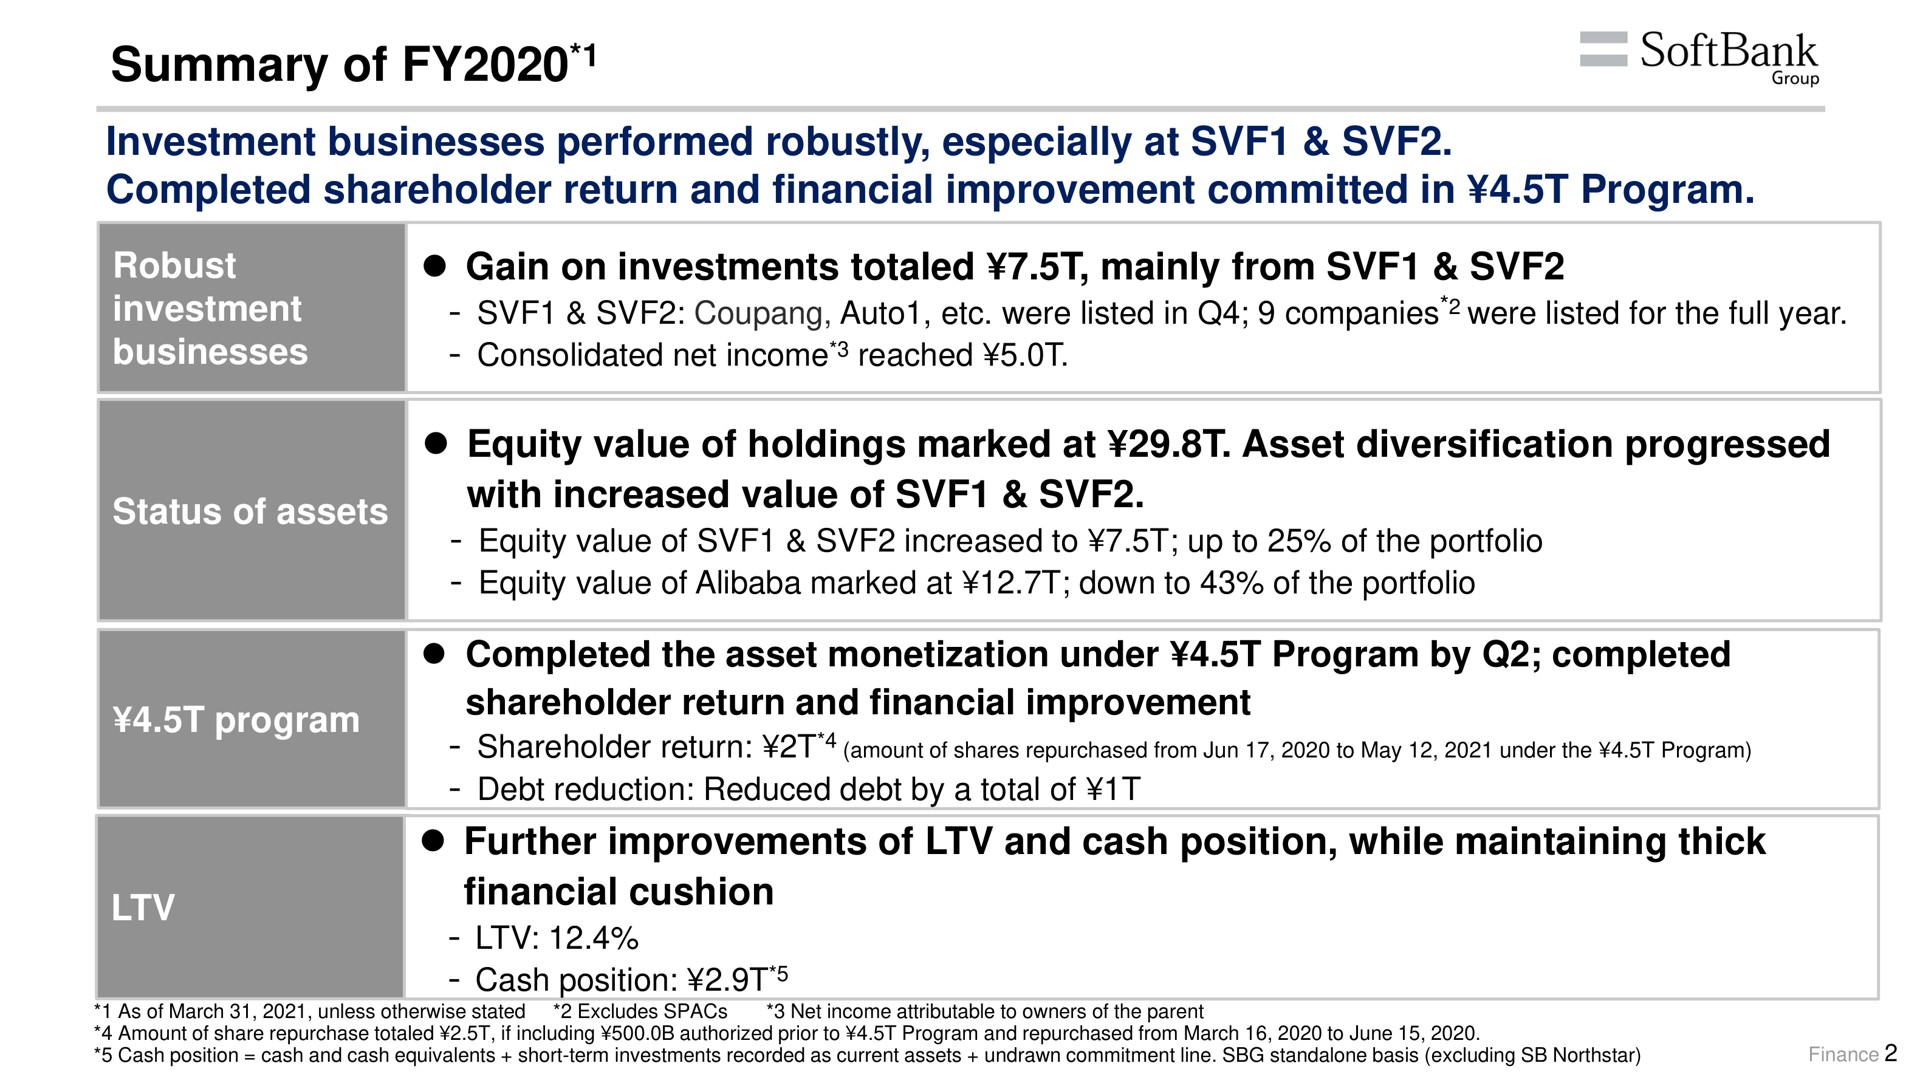 summary of investment businesses performed robustly especially at completed shareholder return and financial improvement committed in program | SoftBank